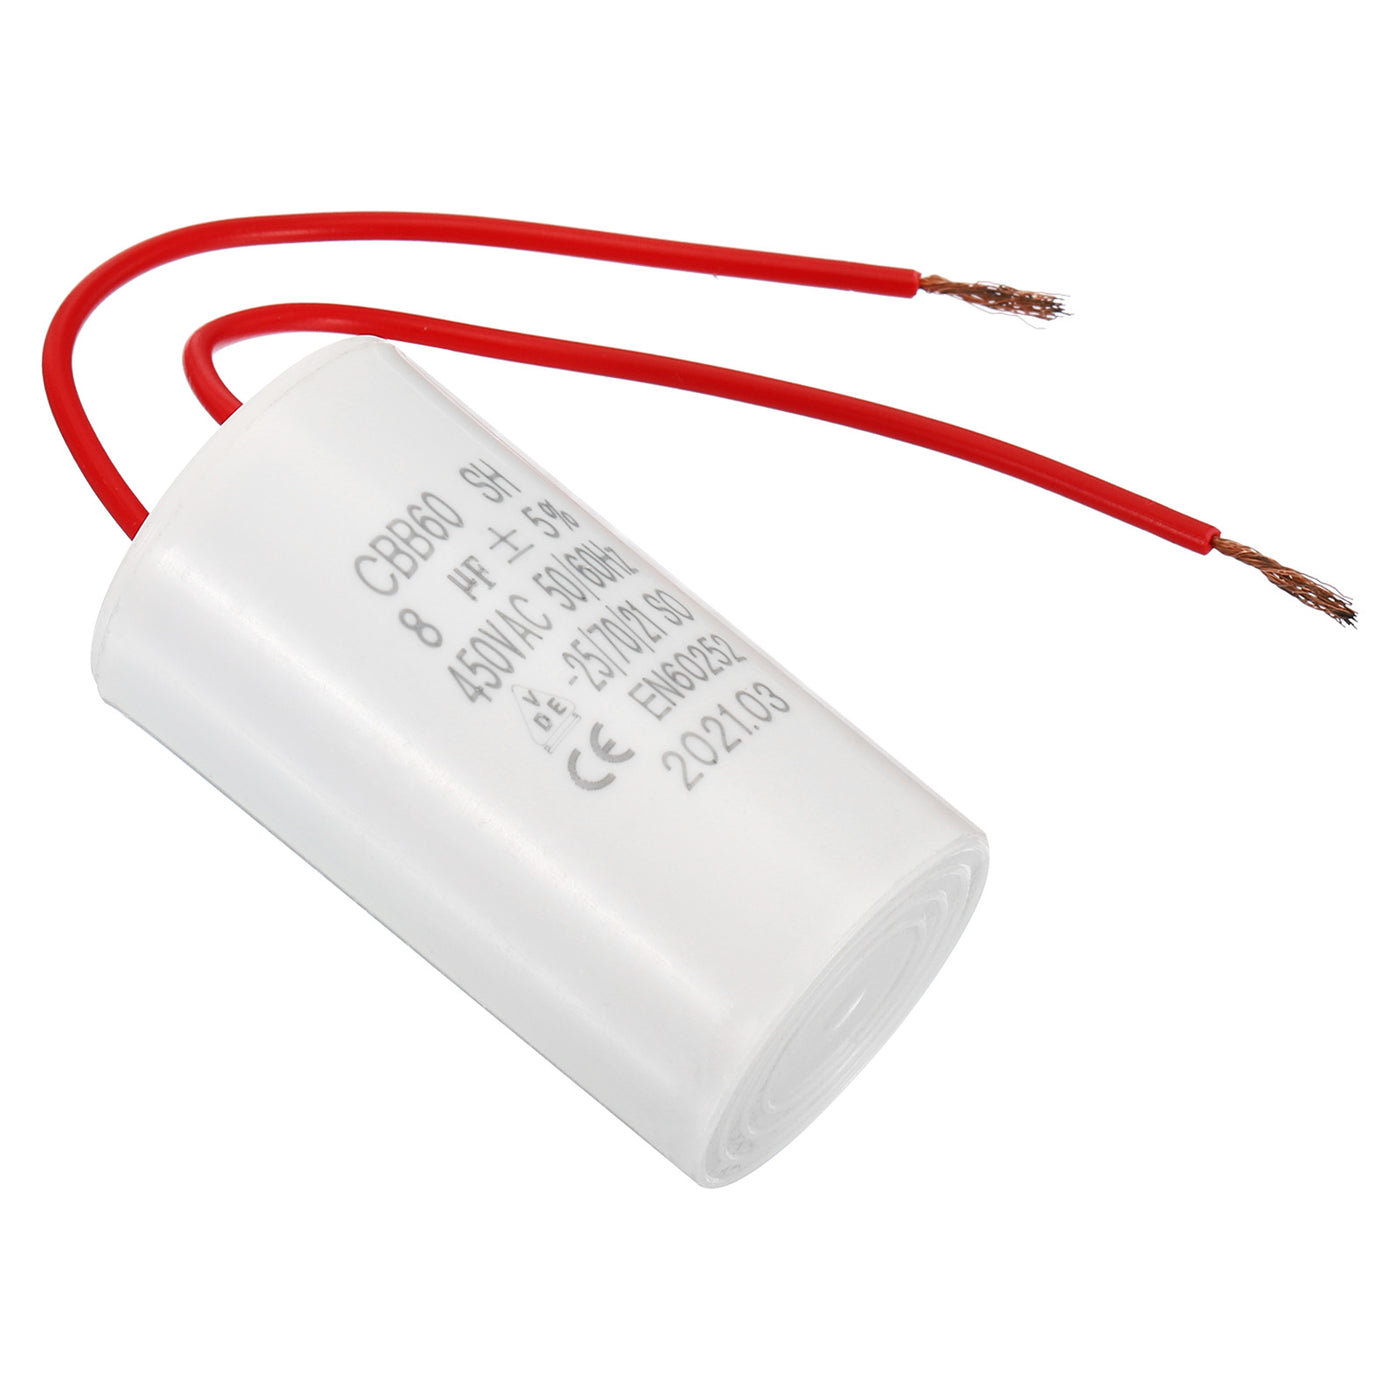 Harfington CBB60 8uF Running Capacitor,AC 450V 50/60Hz with 2 Wires 12cm for Water Pump